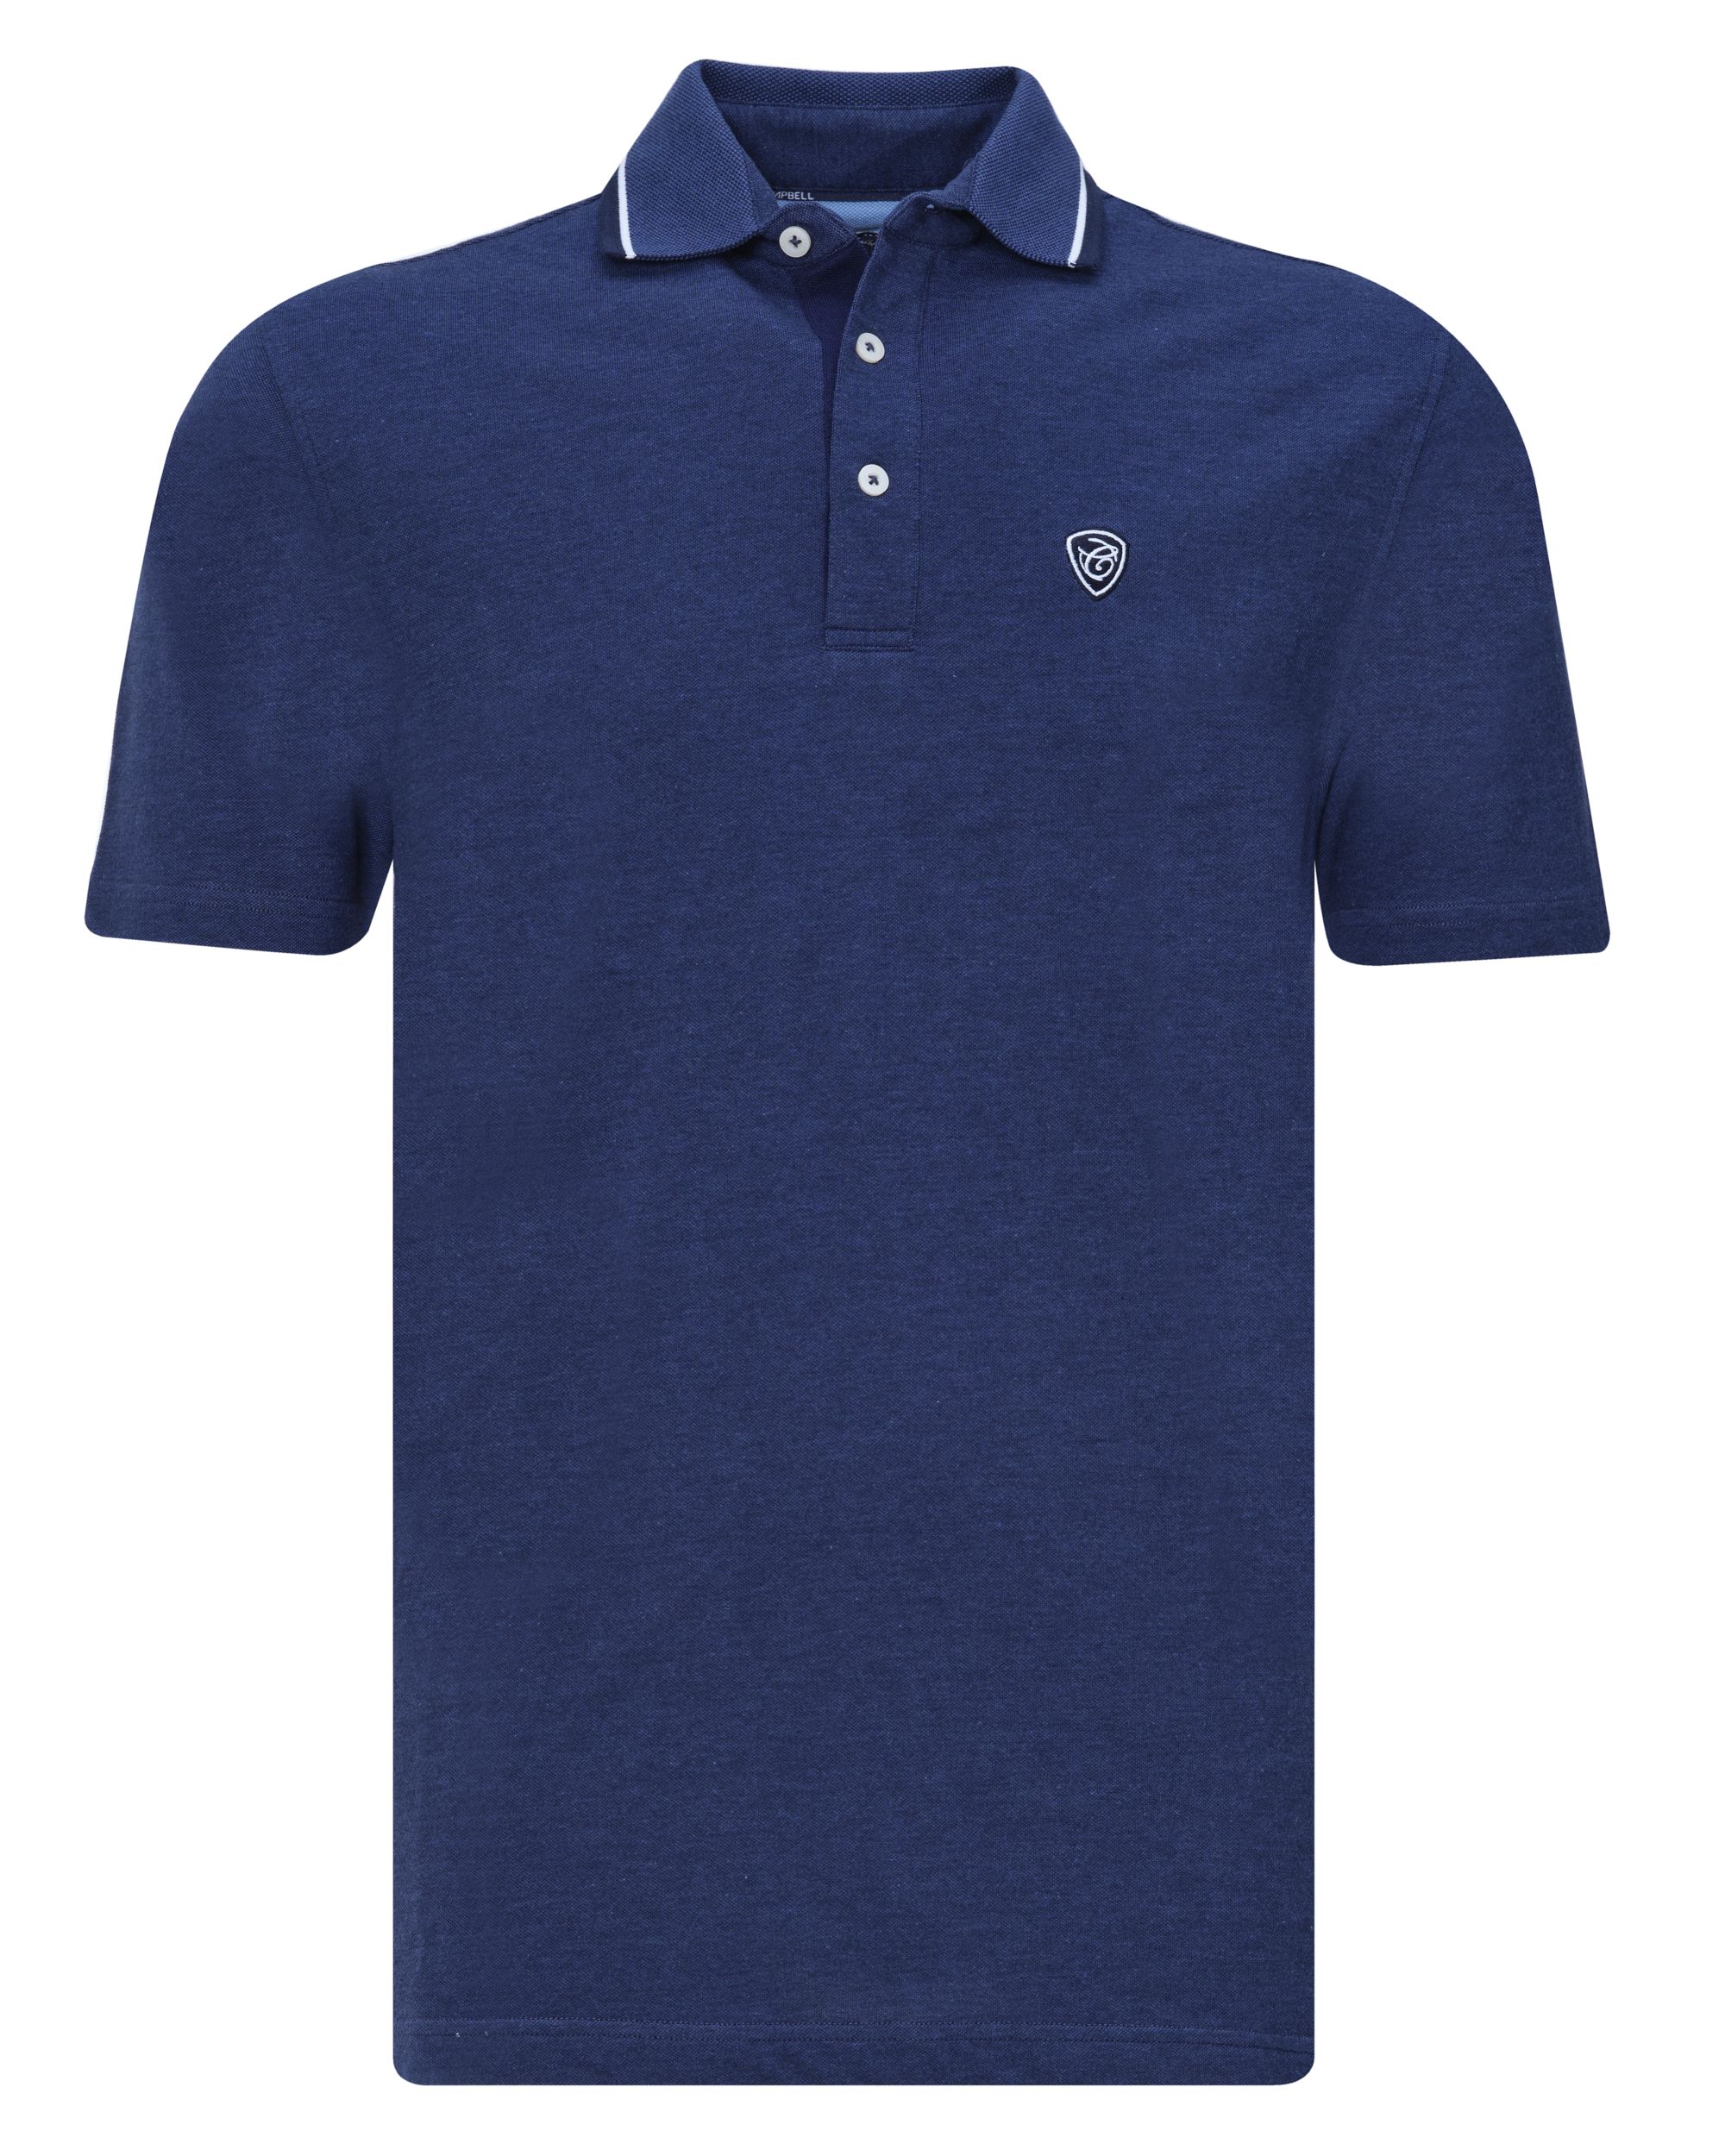 Campbell Stanson Polo SS NAVY 081528-001-L